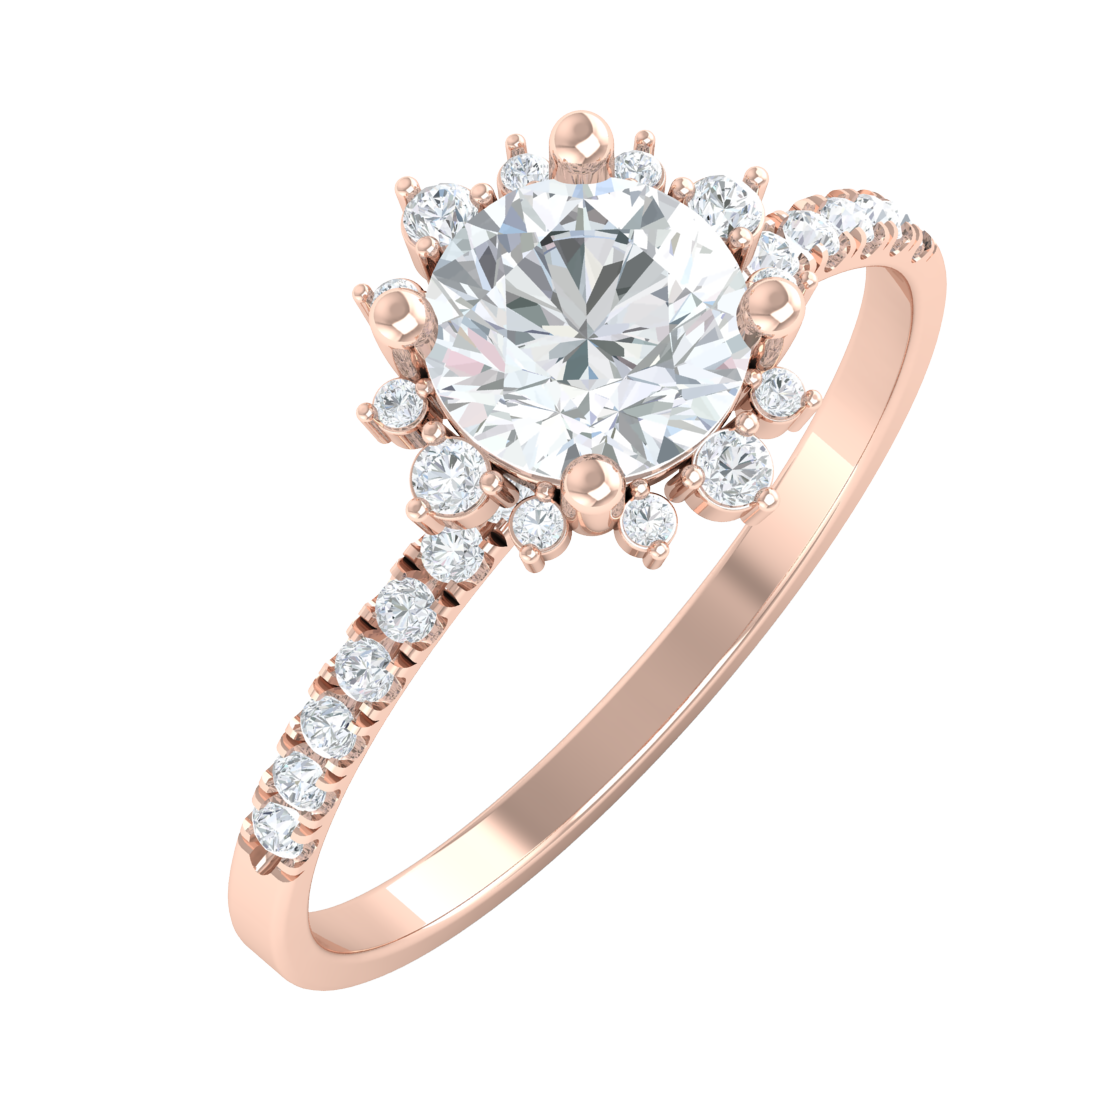 Engagement ring guide | vintage ring 